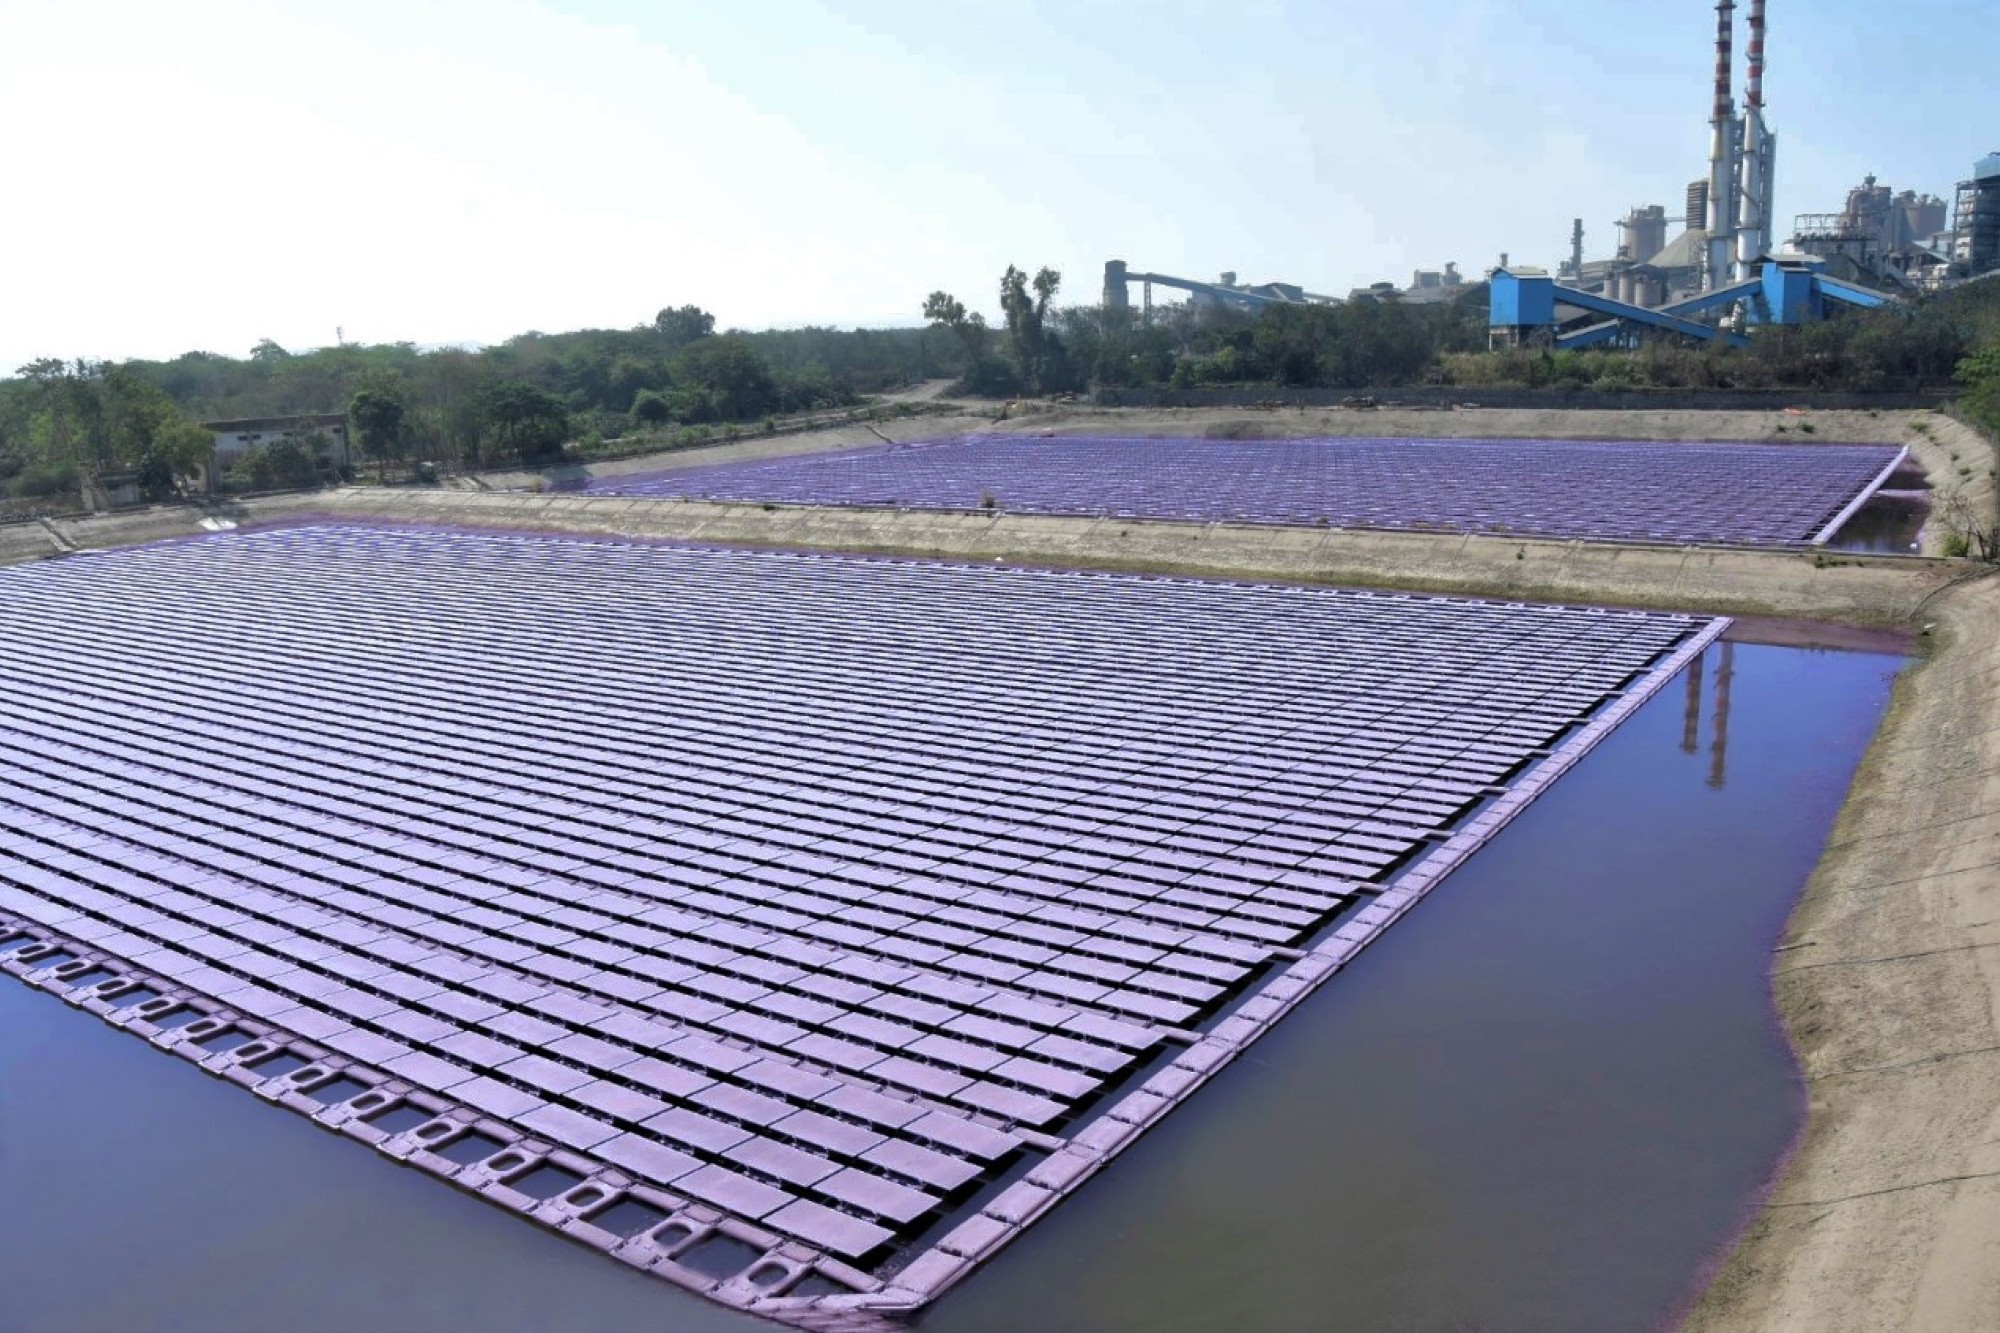 UltraTech boosts renewable energy with floating solar panel deployment